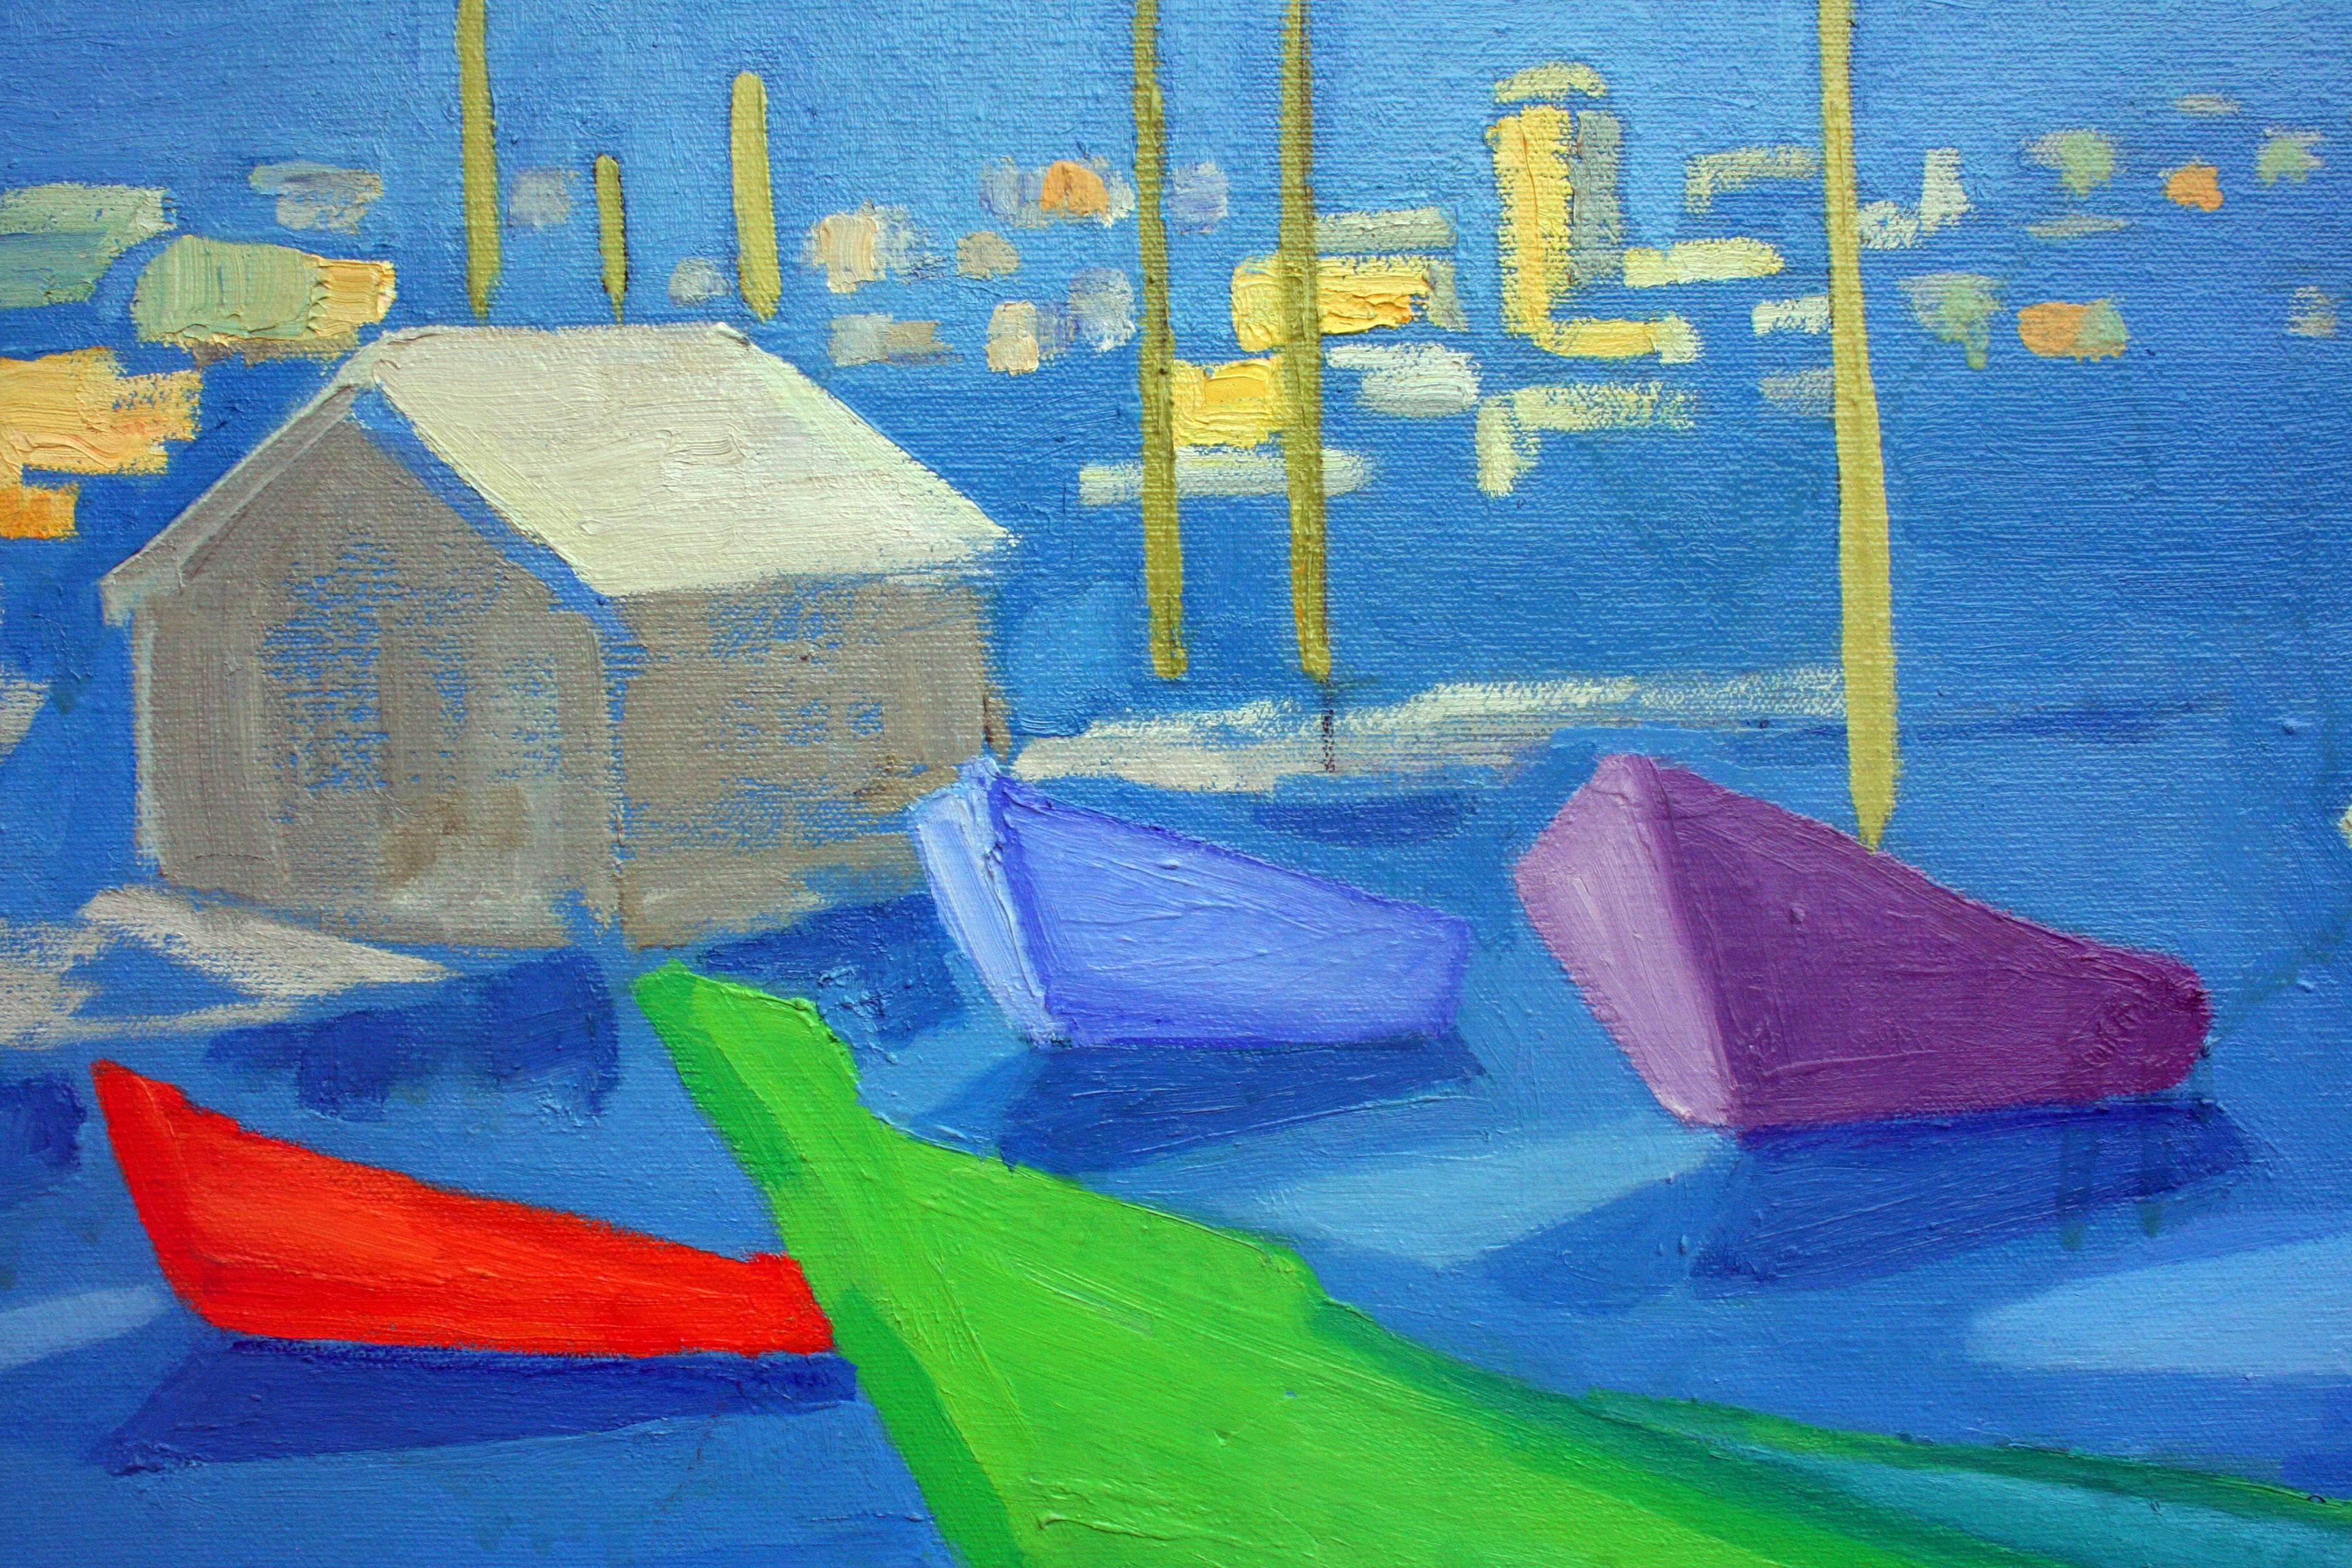 Modernist Boats - Abstract Monterey Seascape in Oil on Canvas - Painting by Virginia Rogers